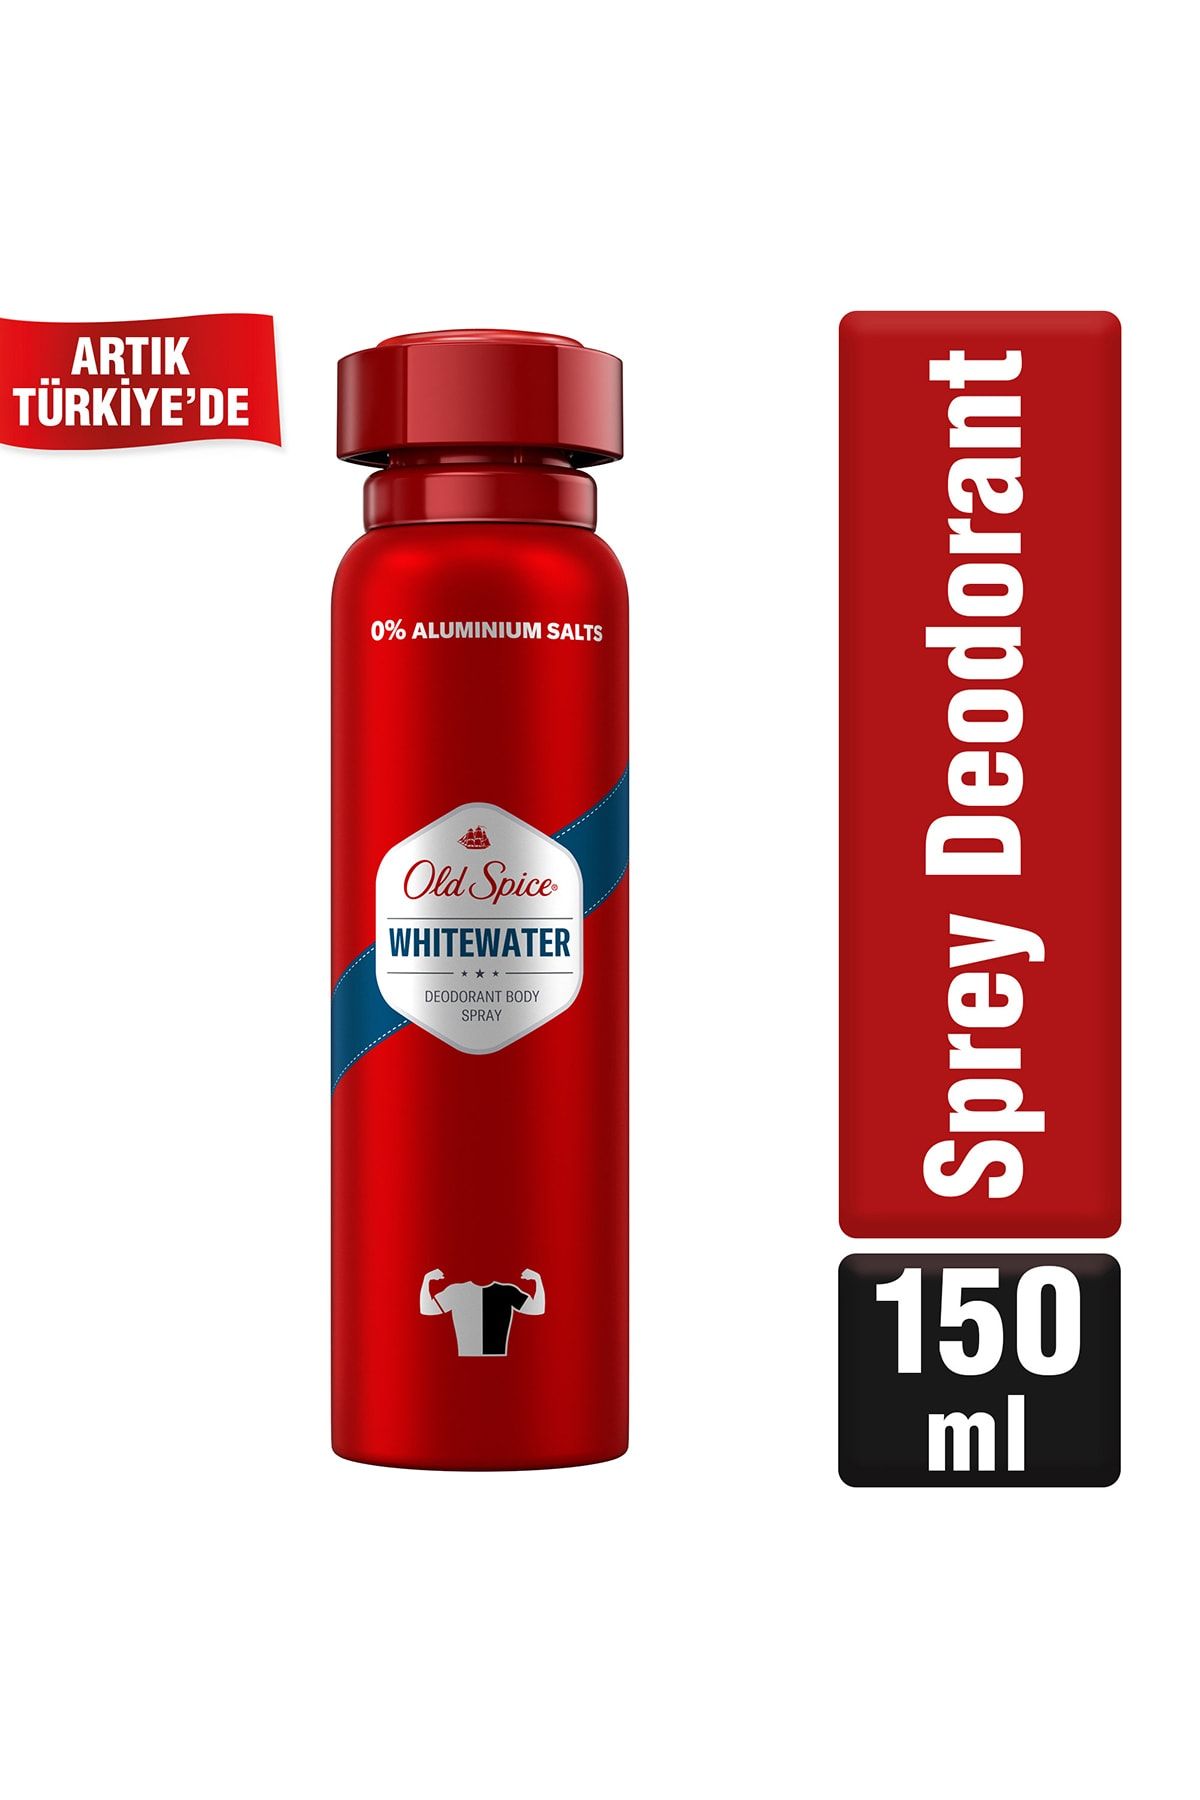 Old Spice Whitewater Deodorant 150 ml